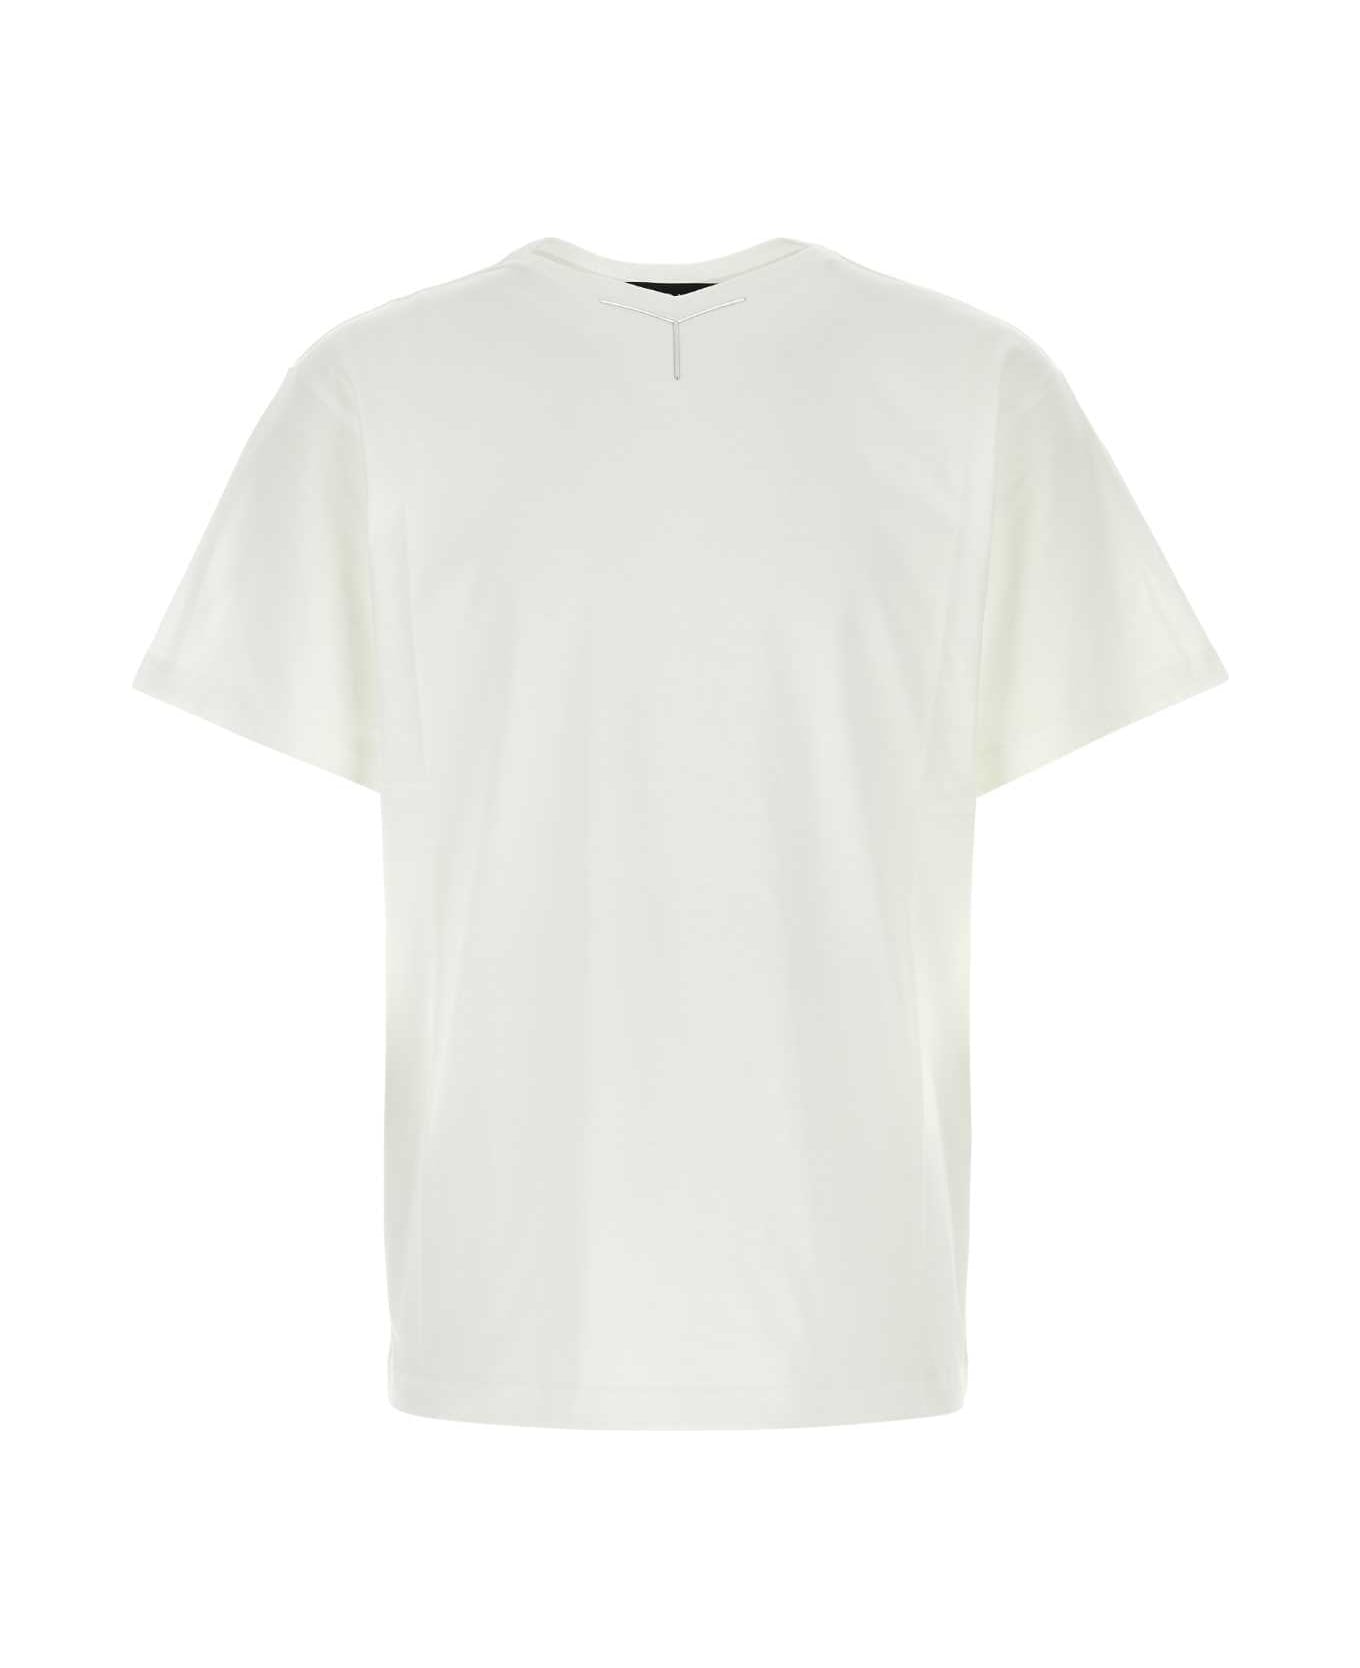 Y/Project White Cotton T-shirt - OPTIC WHITE